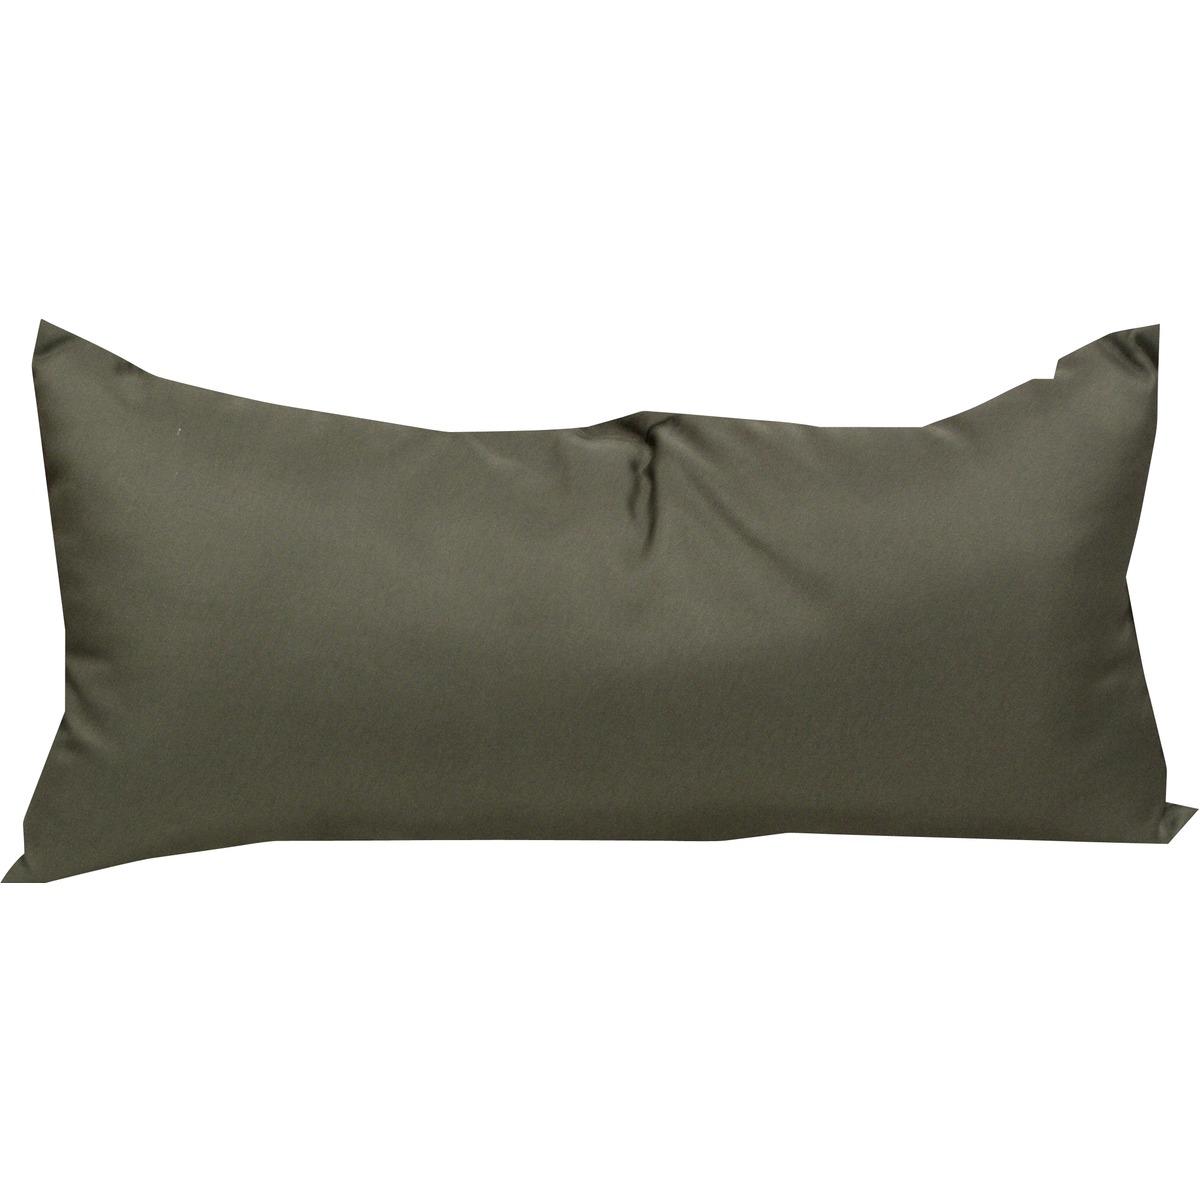 Coussin 100% polyester - 40 x 40 cm - Marron taupe